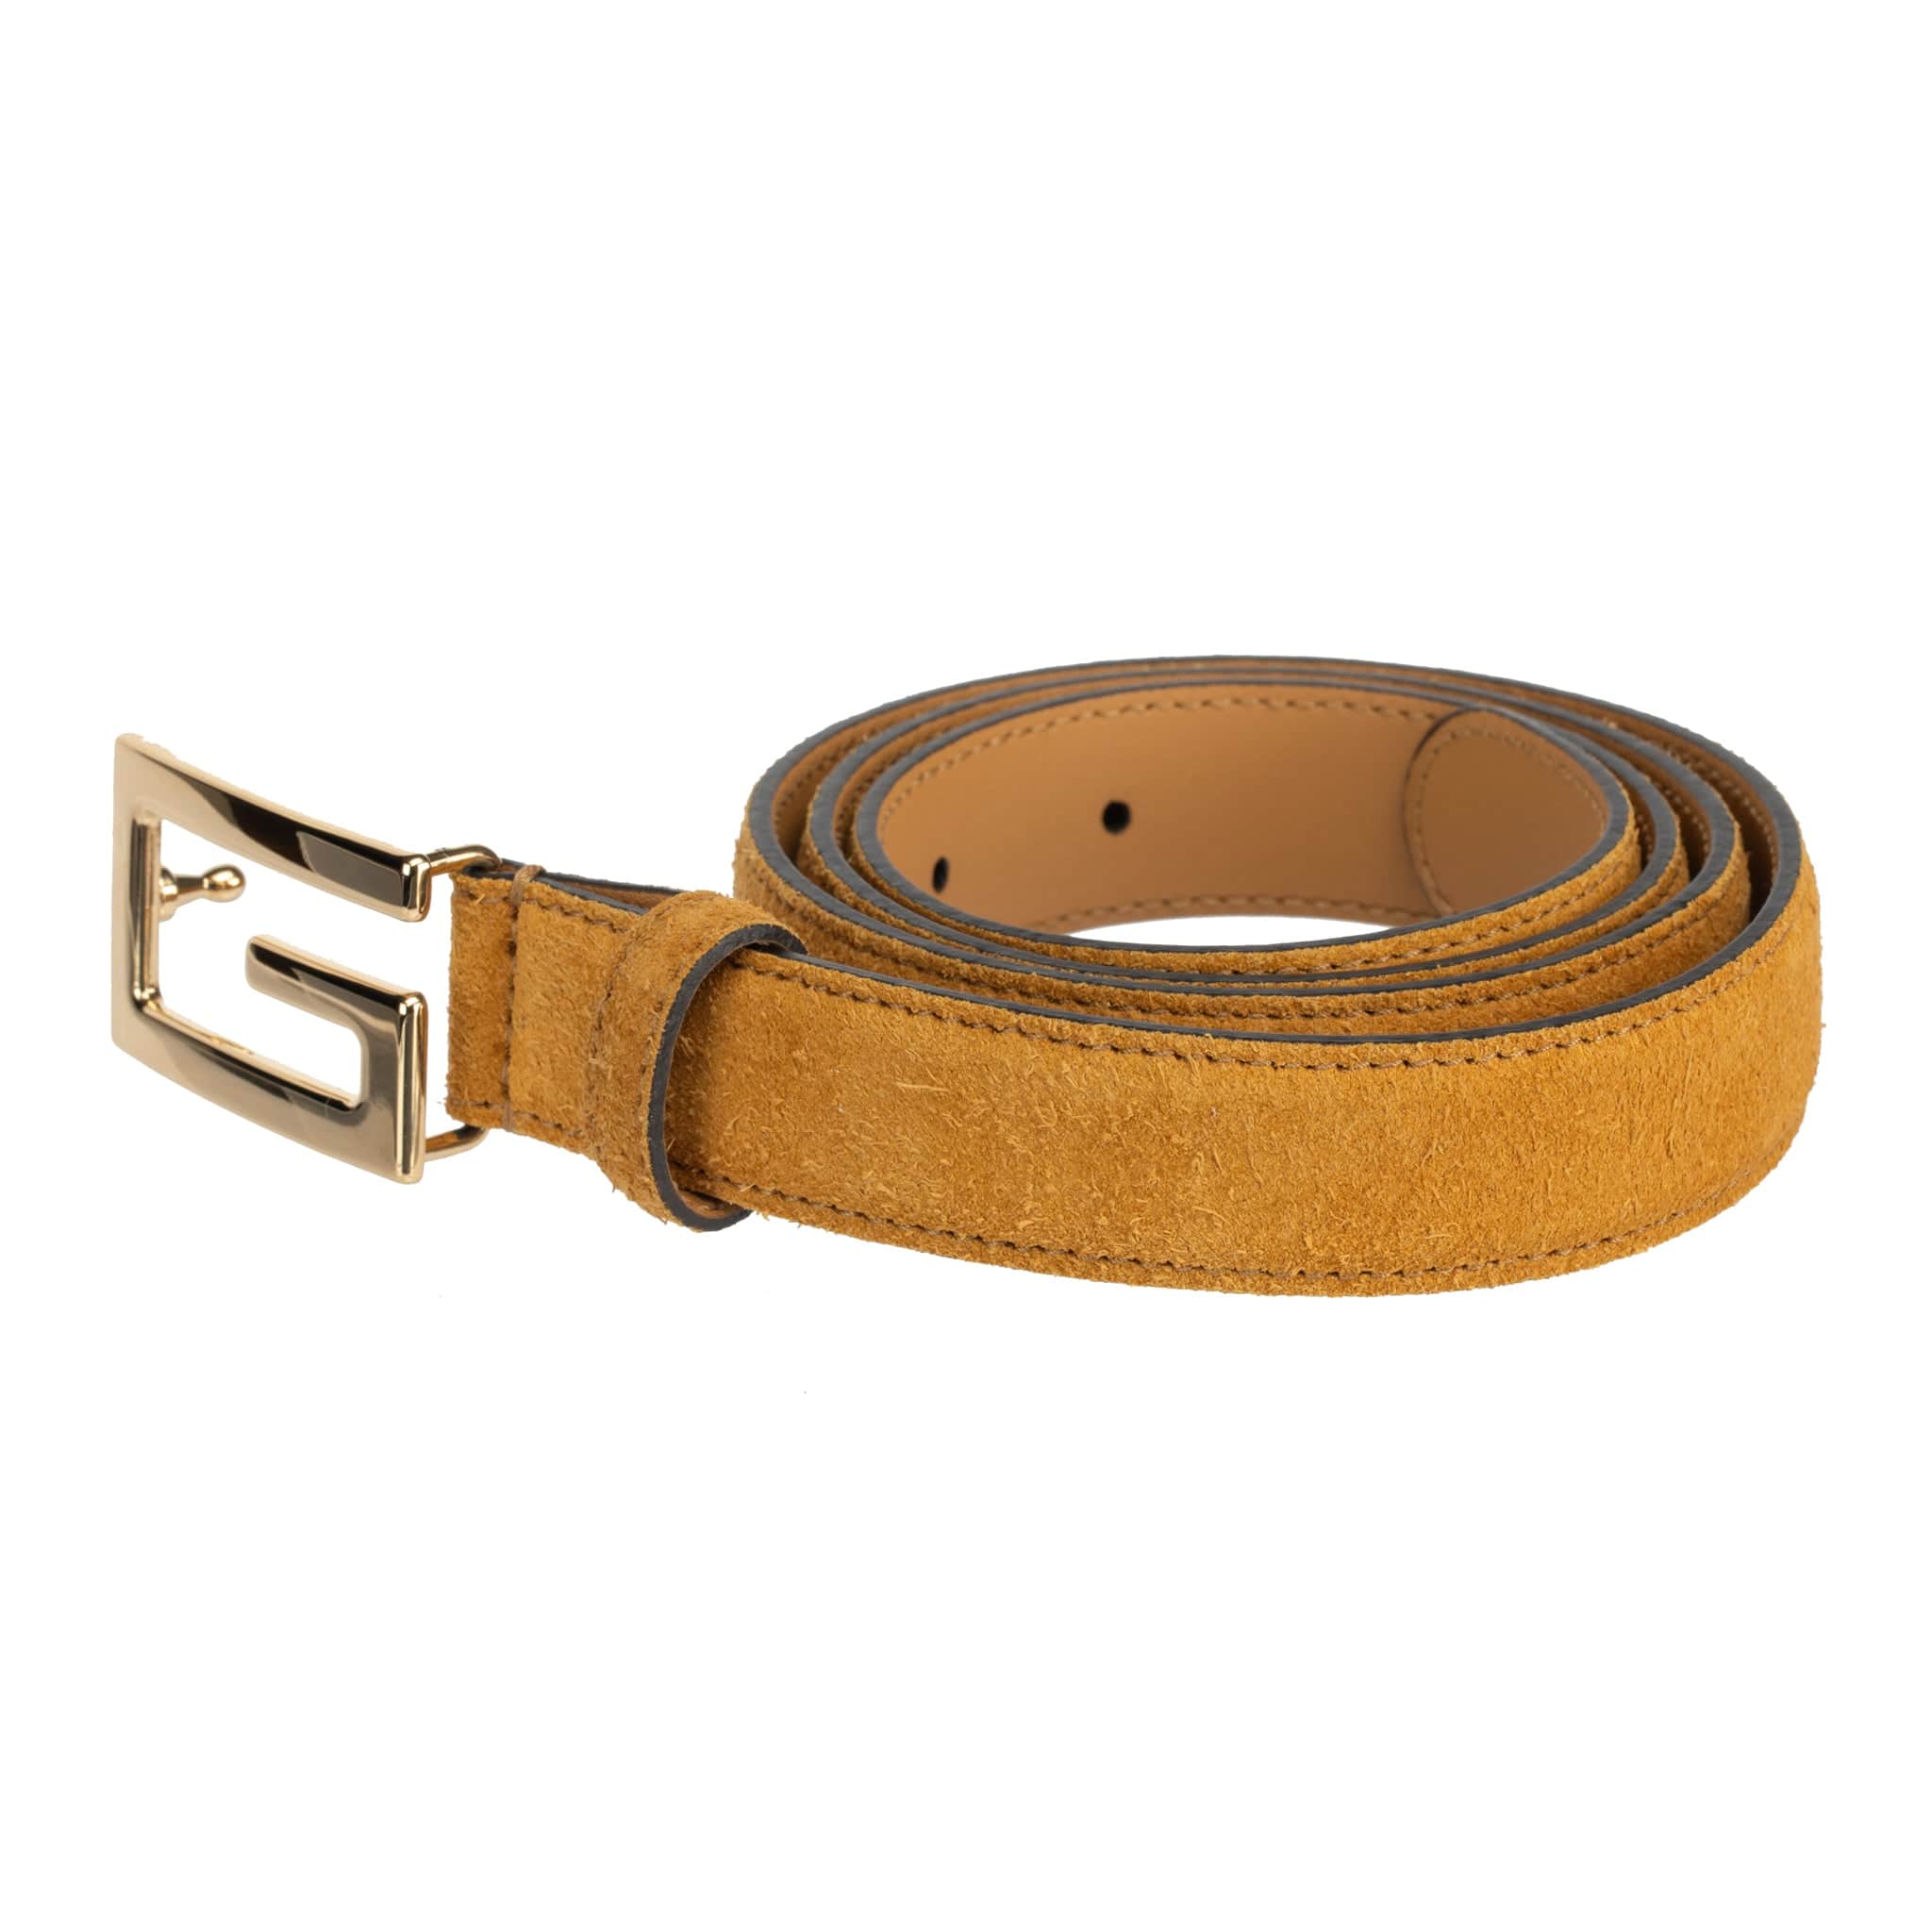 GUCCI ICARO BELT SAFFRON SUEDE LEATHER GOLD HARDWARE - On Repeat